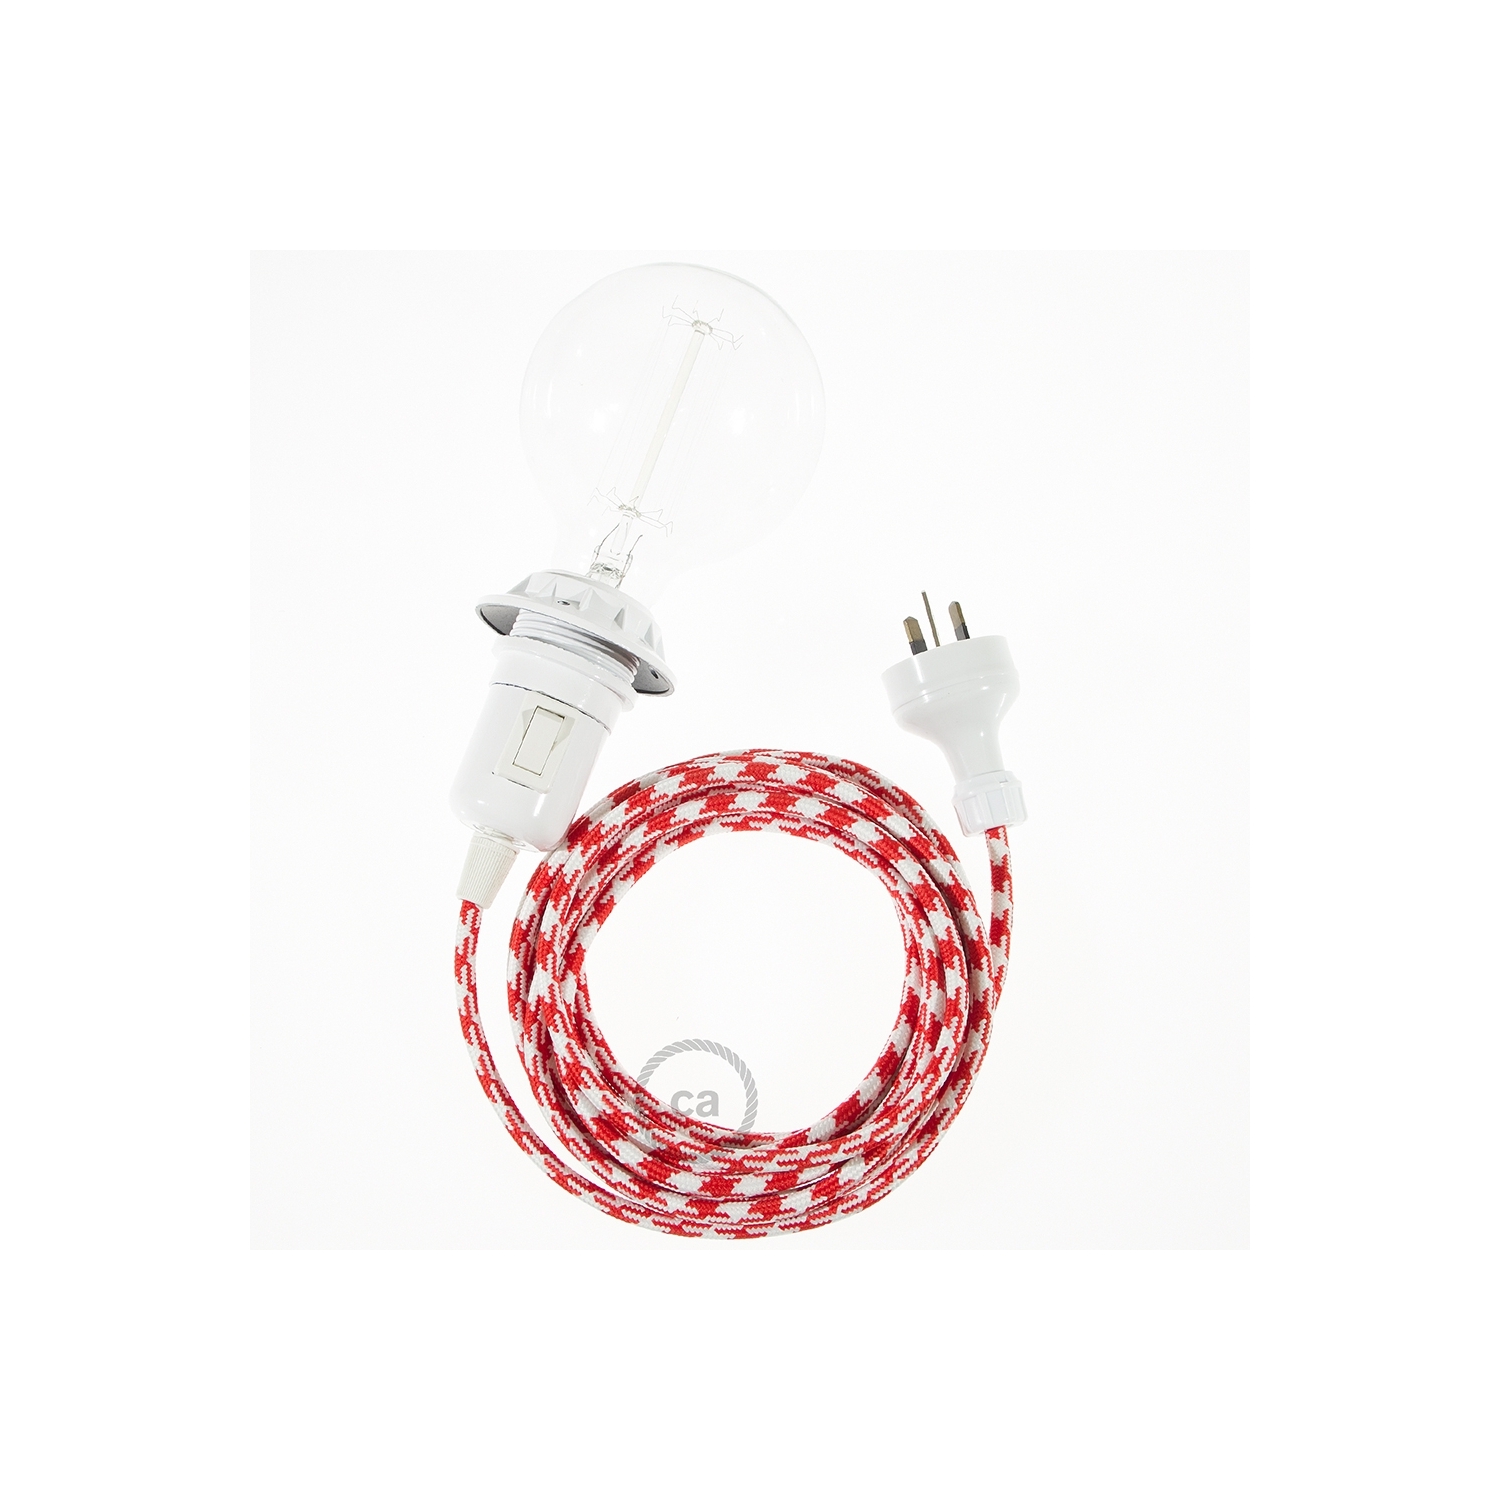 Create your RP09 Bicolored Red Snake for lampshade and bring the light wherever you want.